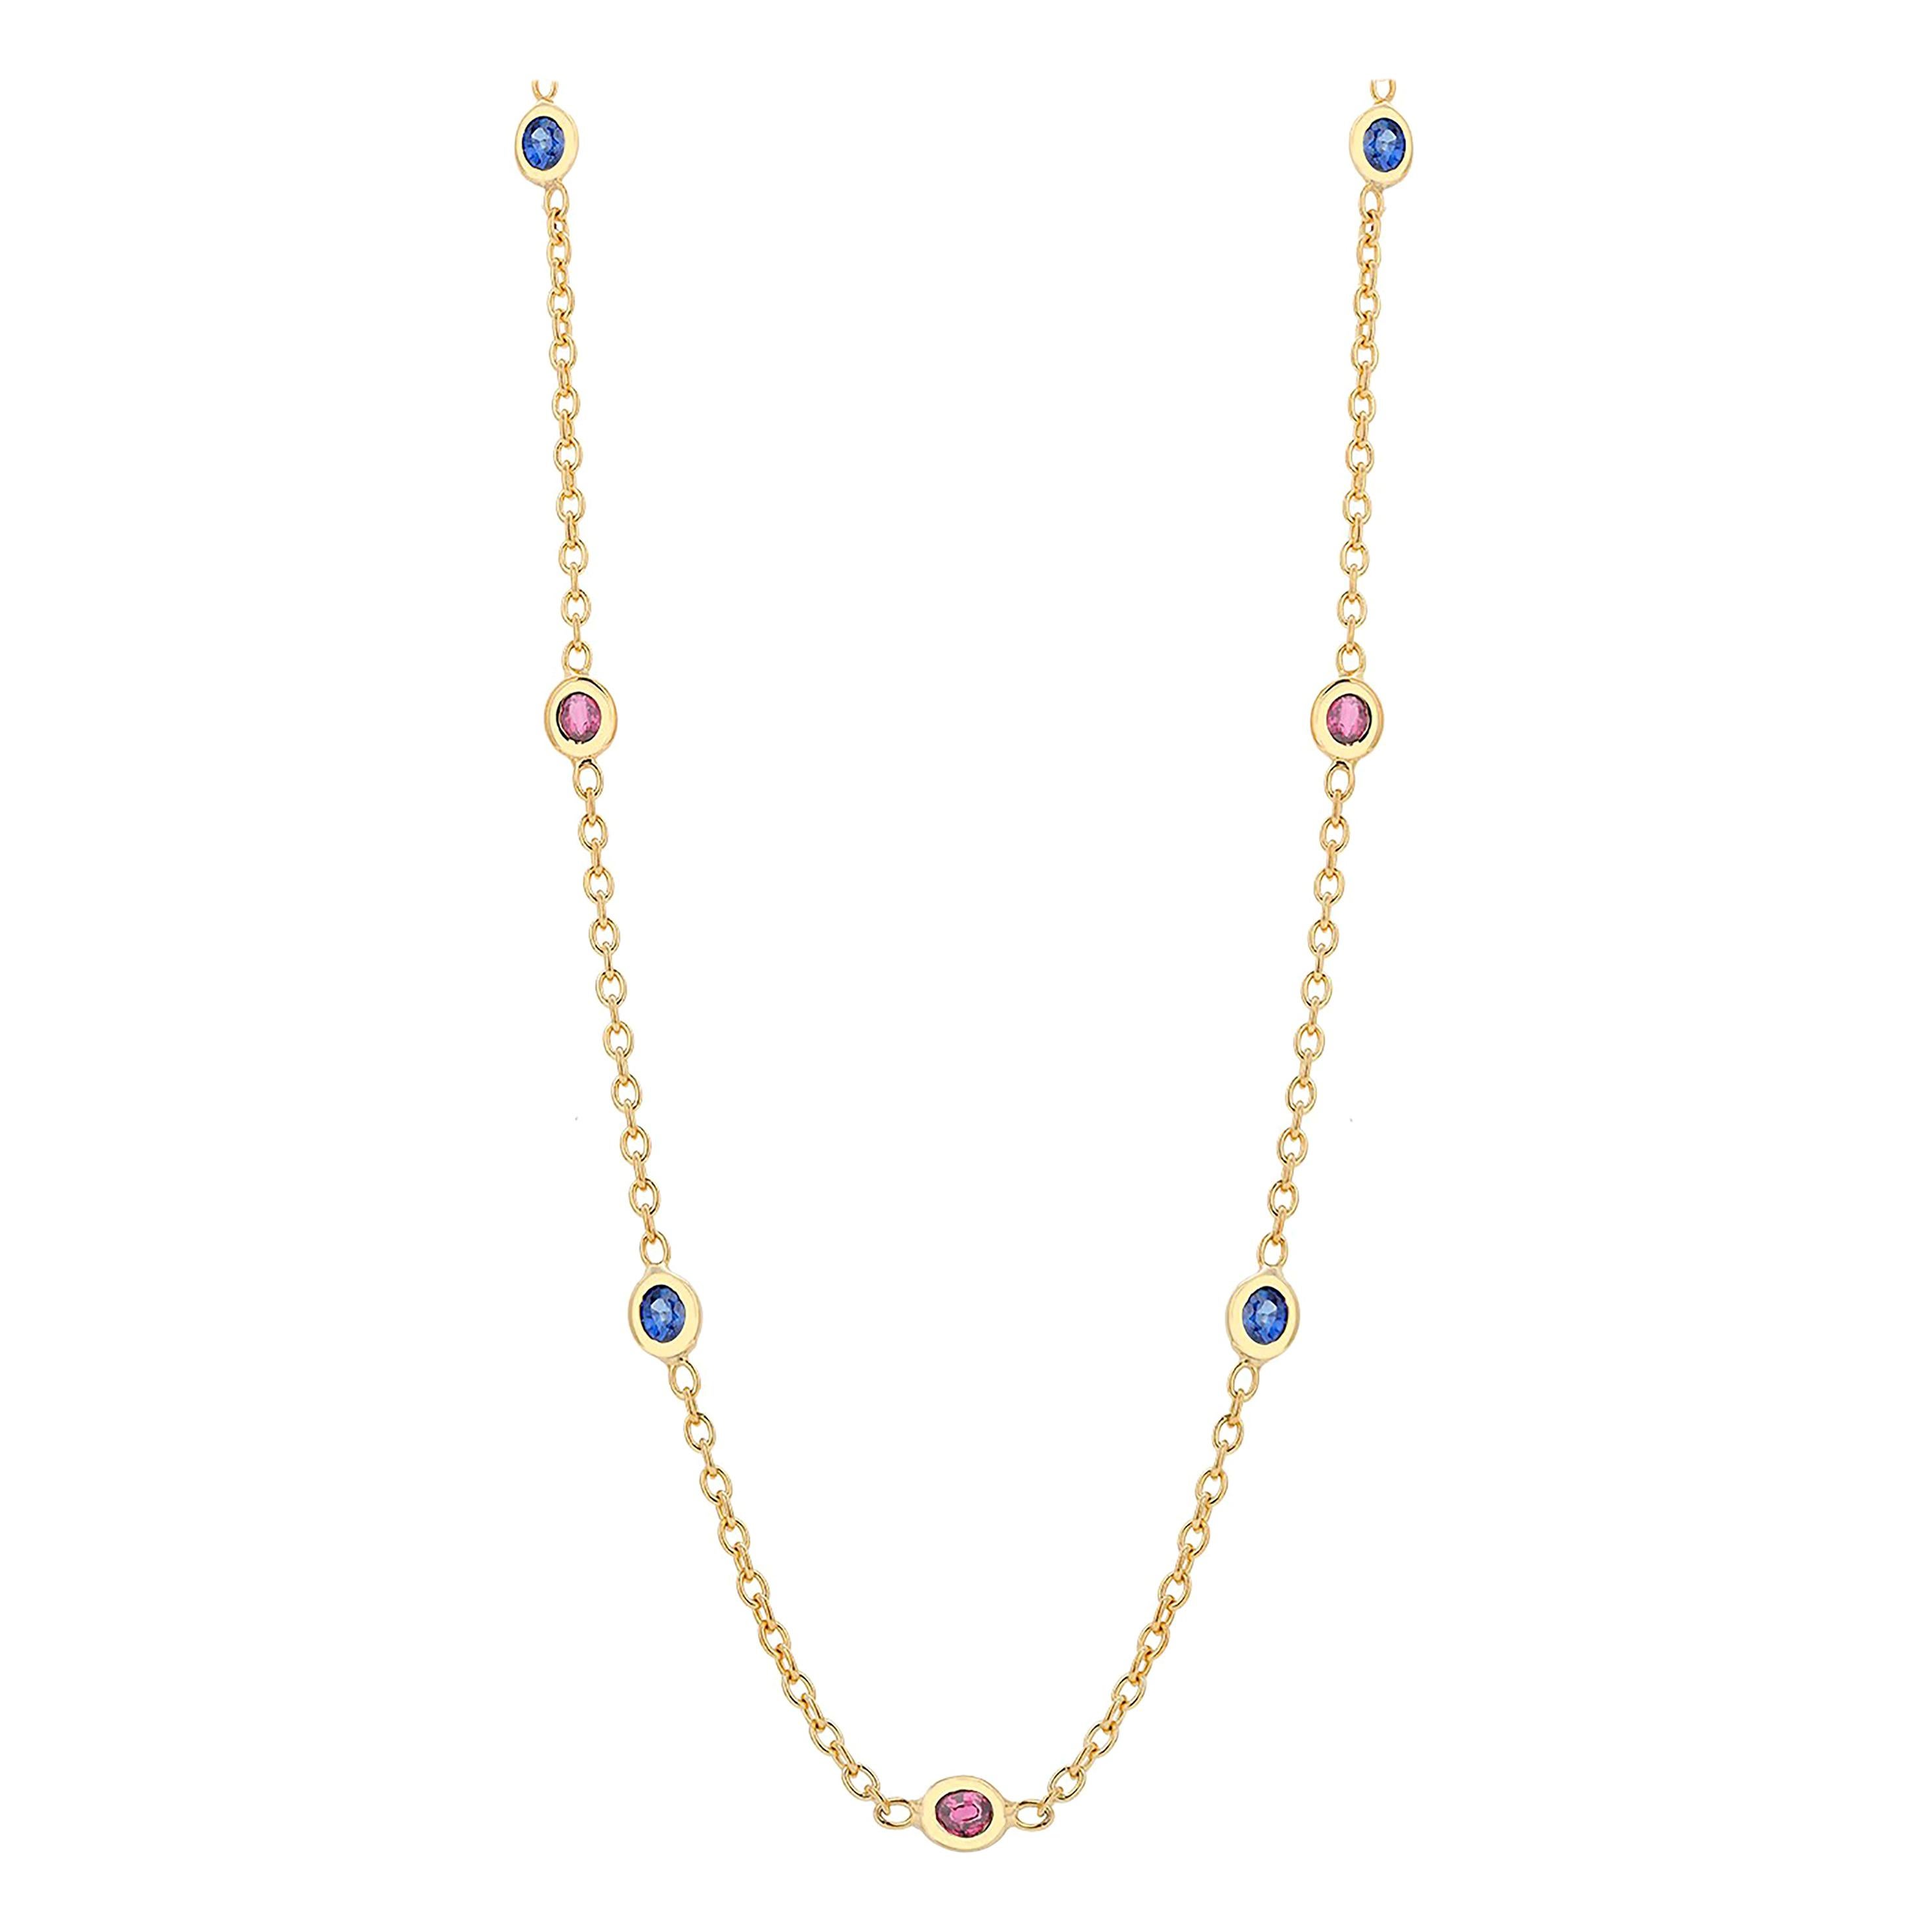 Seven Natural Oval Sapphires and Rubies Bezel Necklace Silver Yellow Gold-Plated